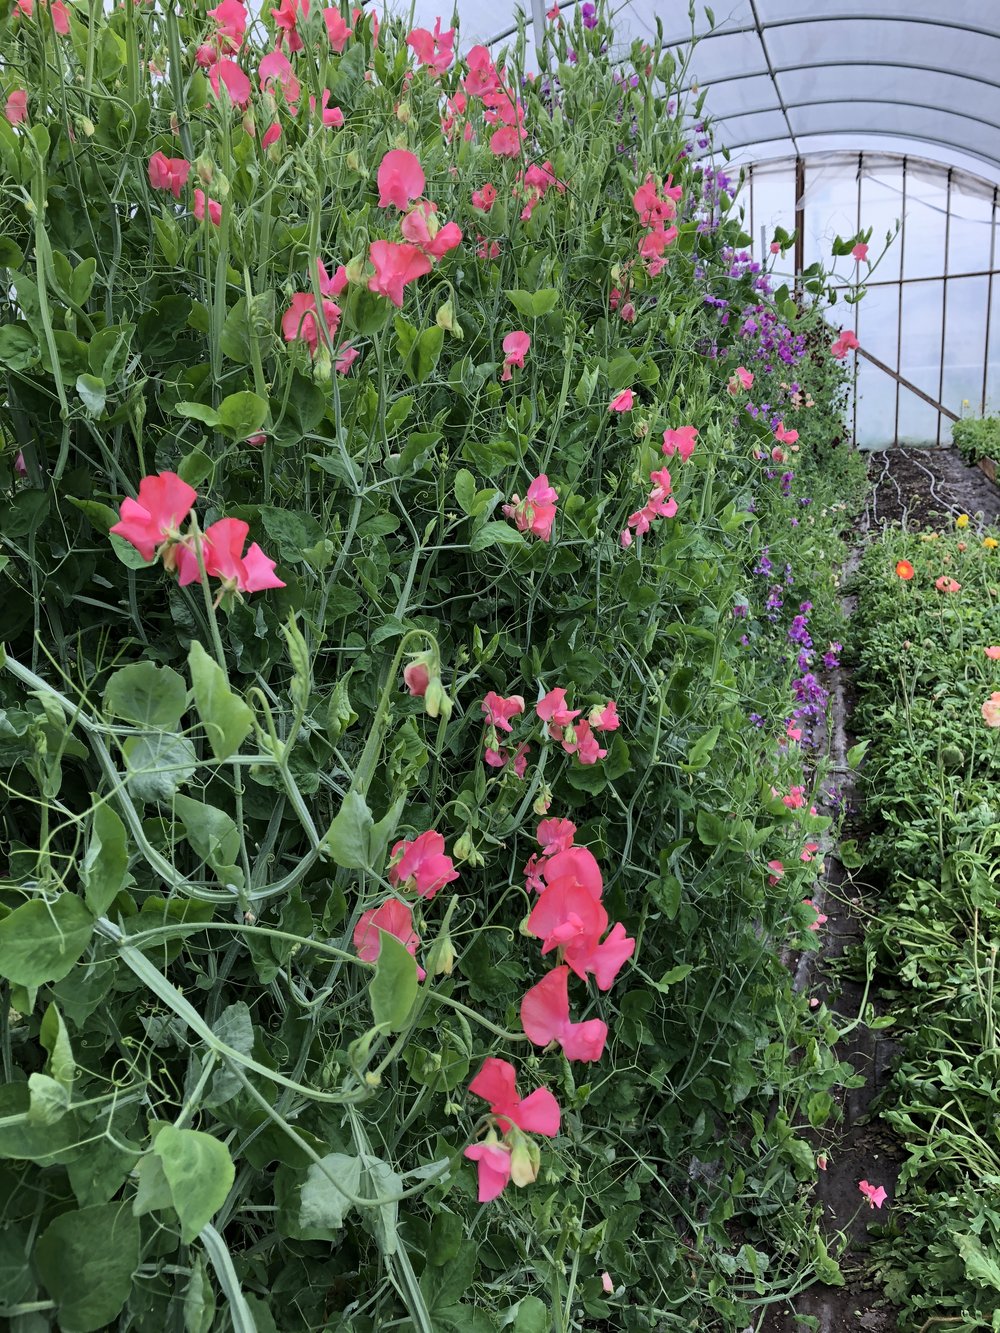 Sweet peas in the greenhouse